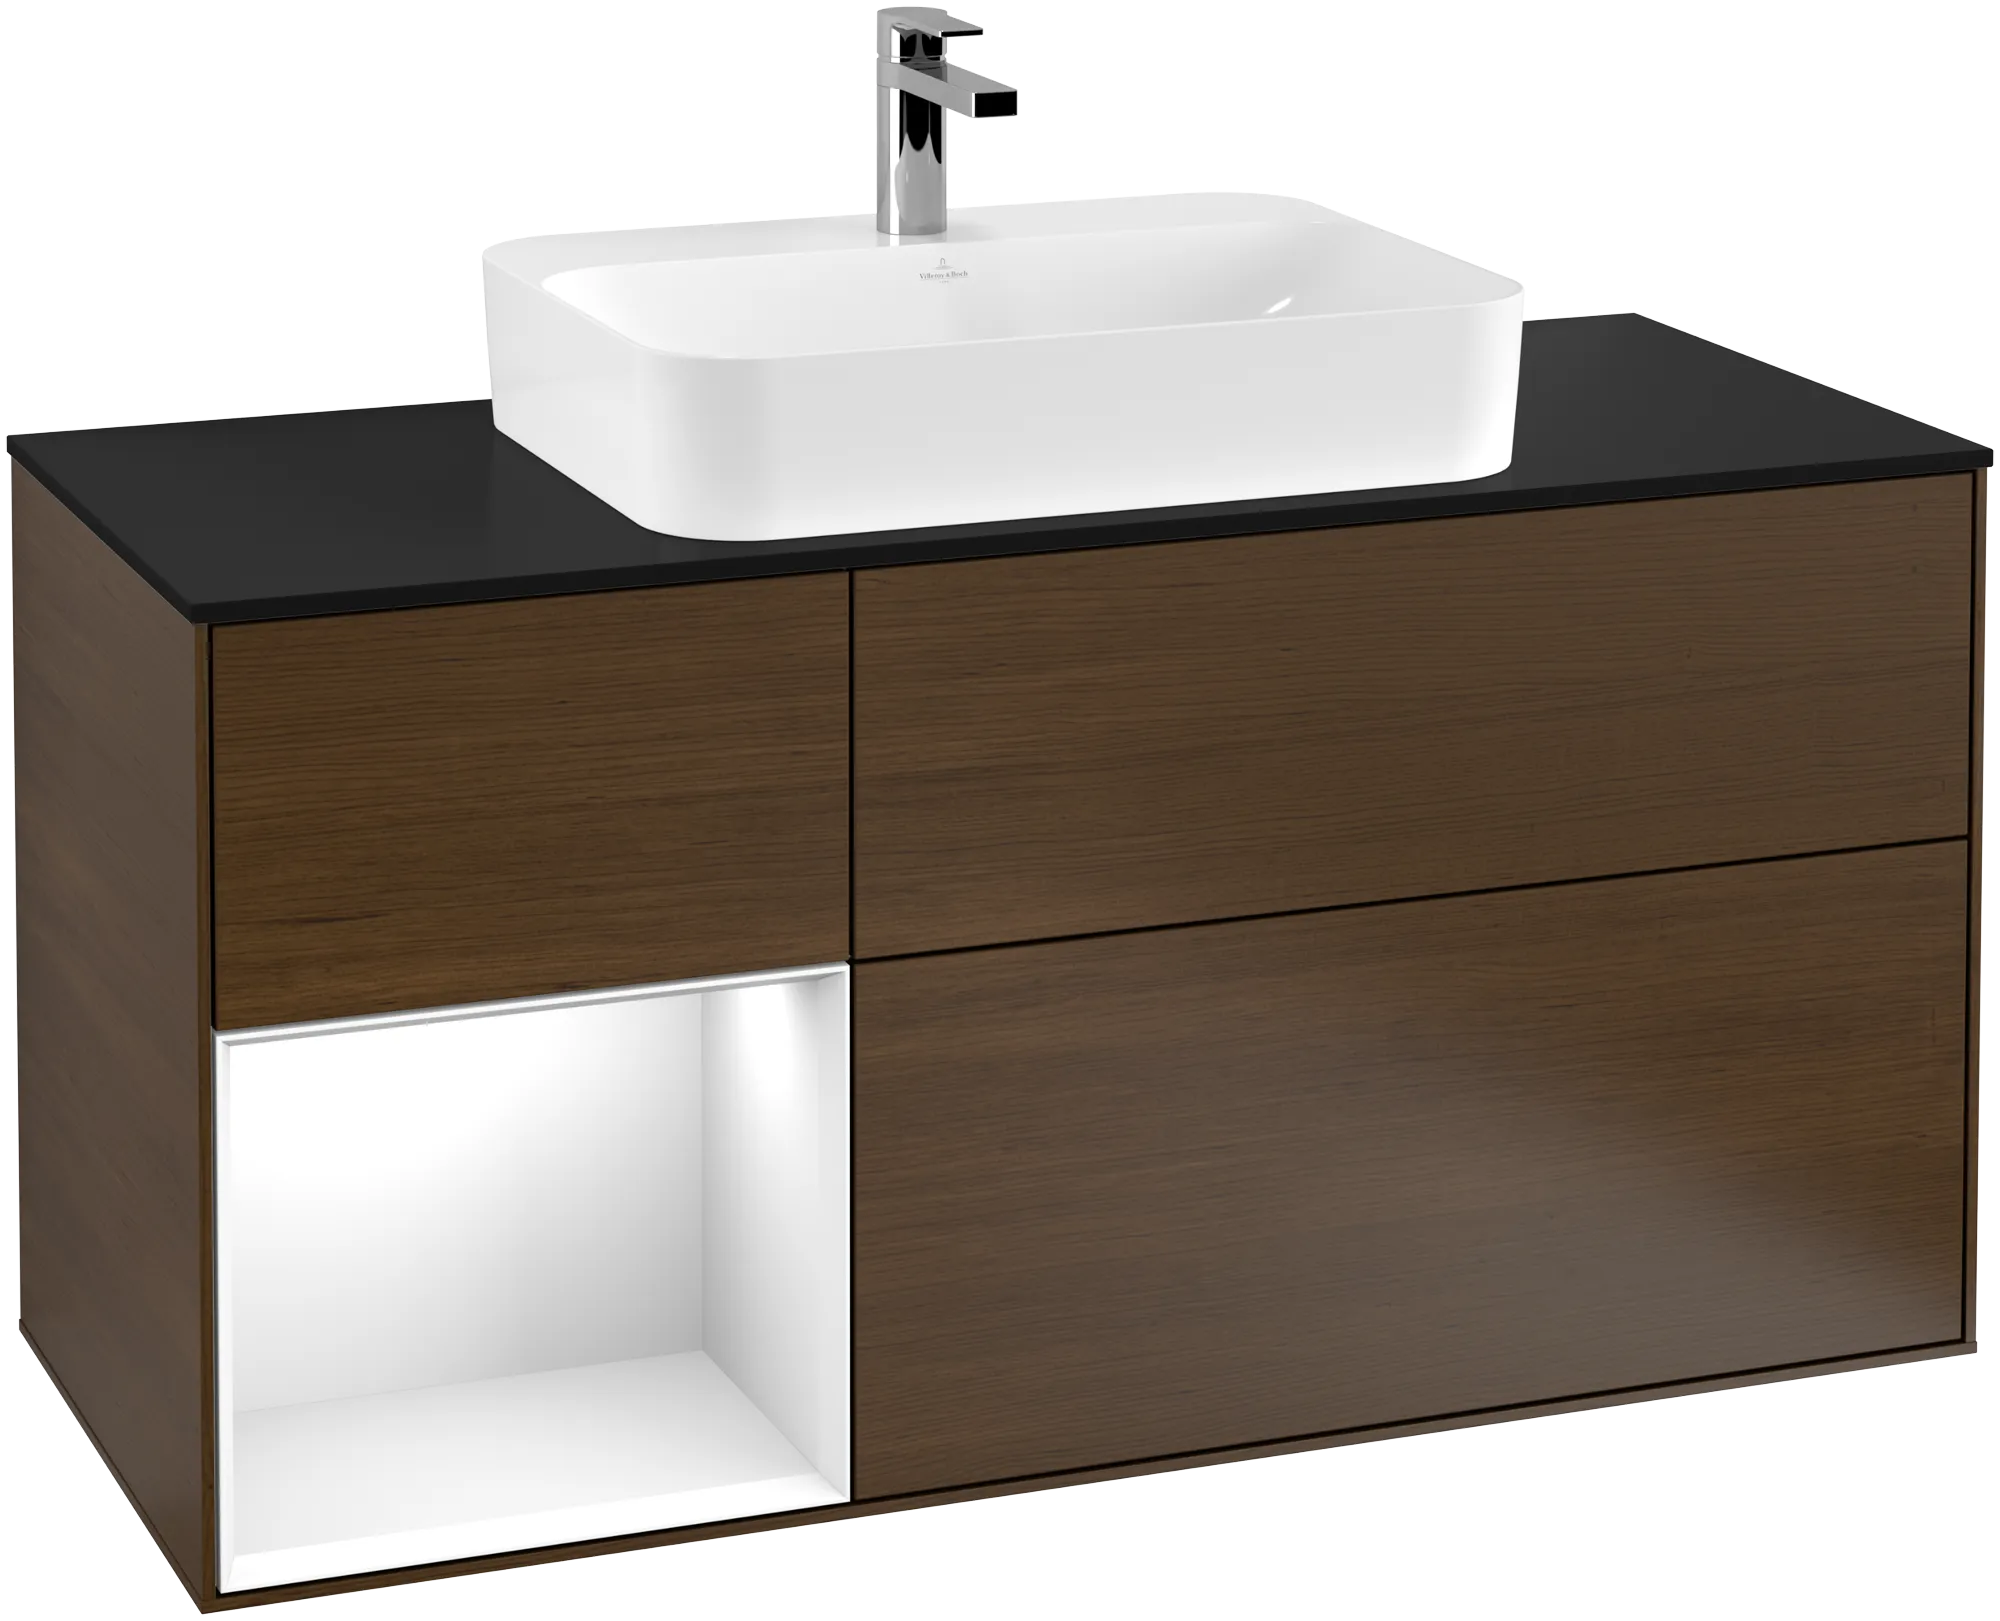 Picture of VILLEROY BOCH Finion Vanity unit, with lighting, 3 pull-out compartments, 1200 x 603 x 501 mm, Walnut Veneer / Glossy White Lacquer / Glass Black Matt #G412GFGN